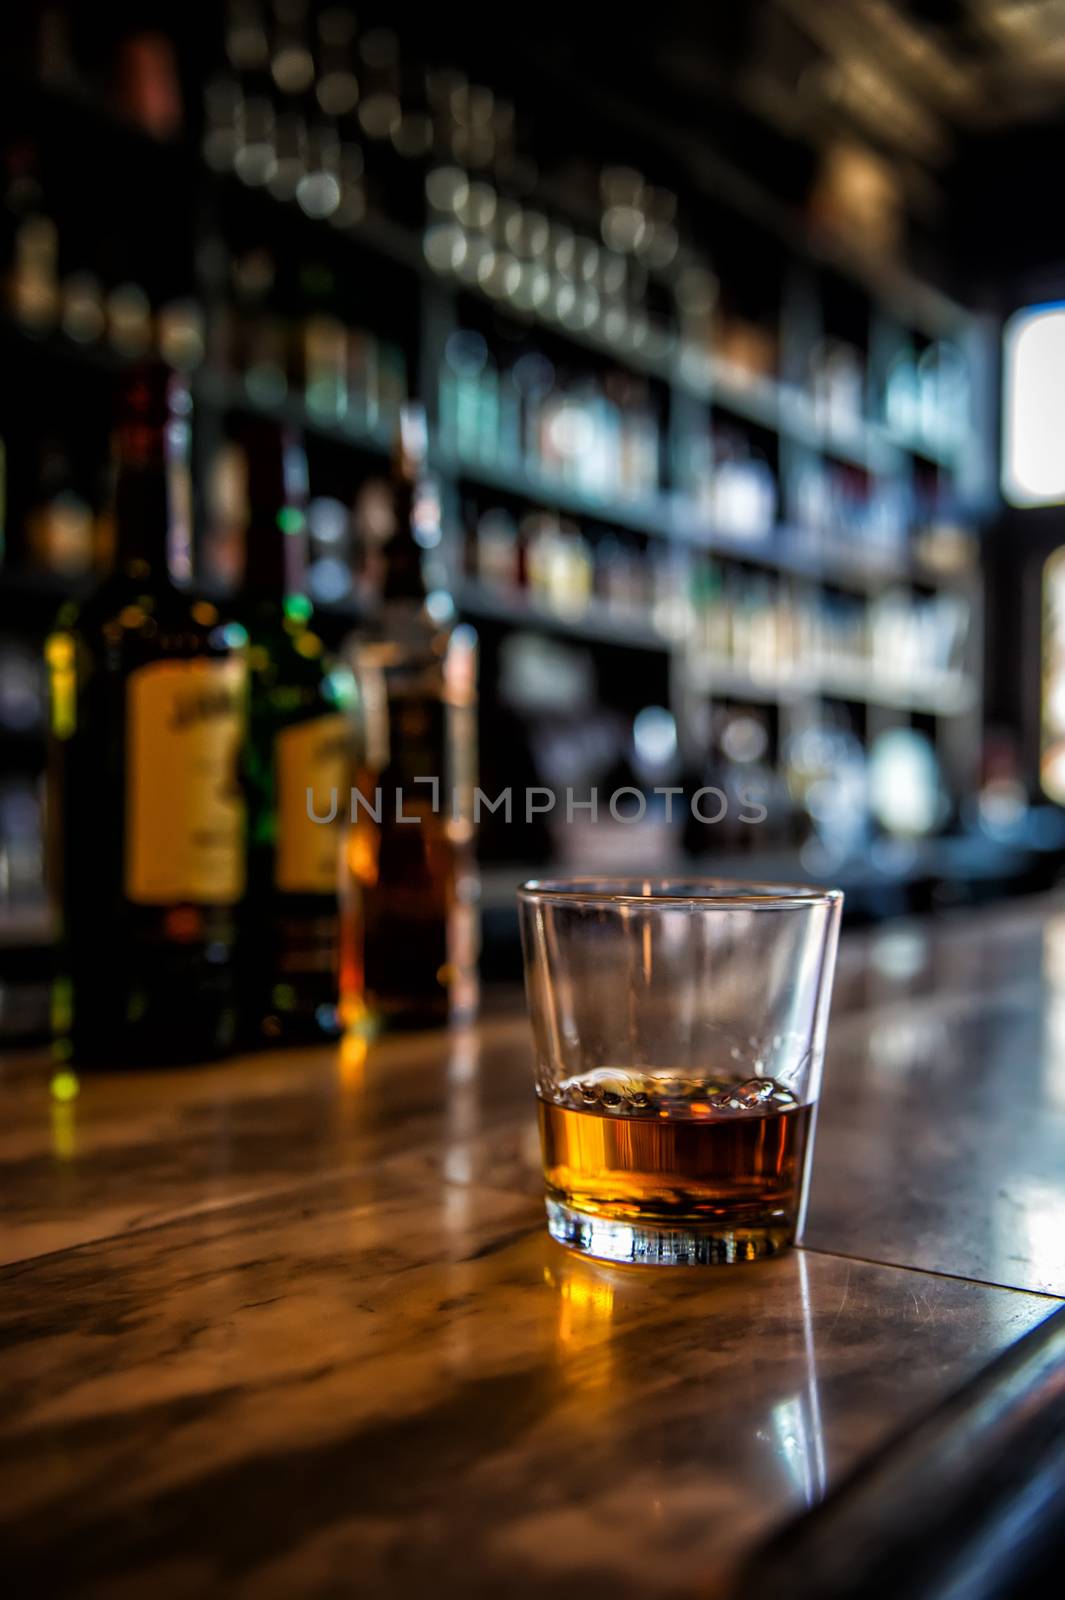 Image of a glass of whiskey on a bar with blurred background